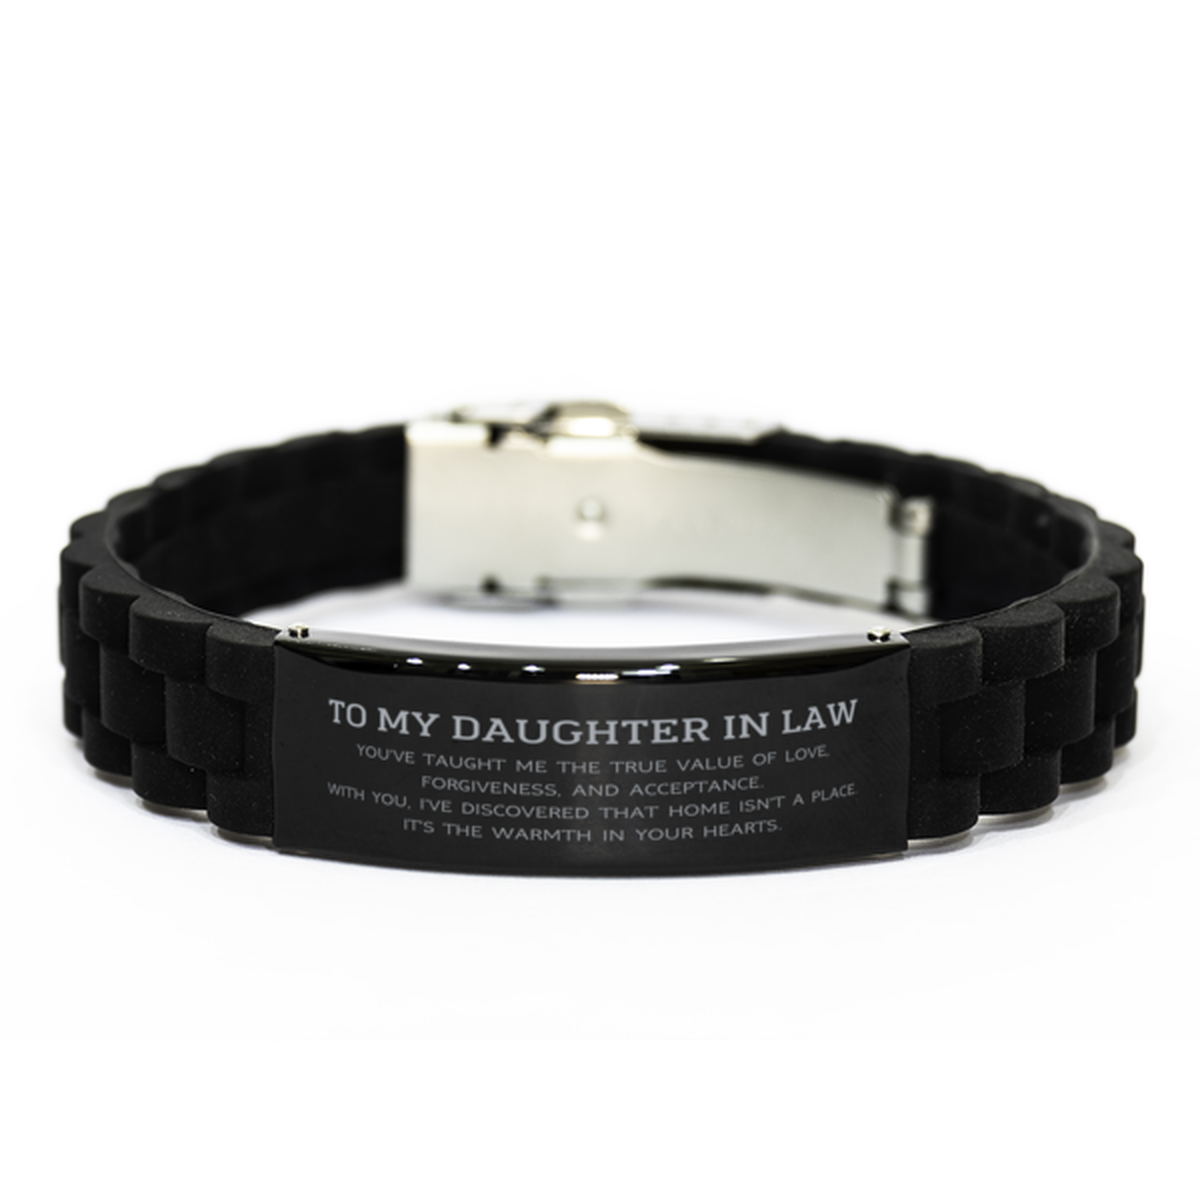 To My Daughter In Law Gifts, You've taught me the true value of love, Thank You Gifts For Daughter In Law, Birthday Black Glidelock Clasp Bracelet For Daughter In Law